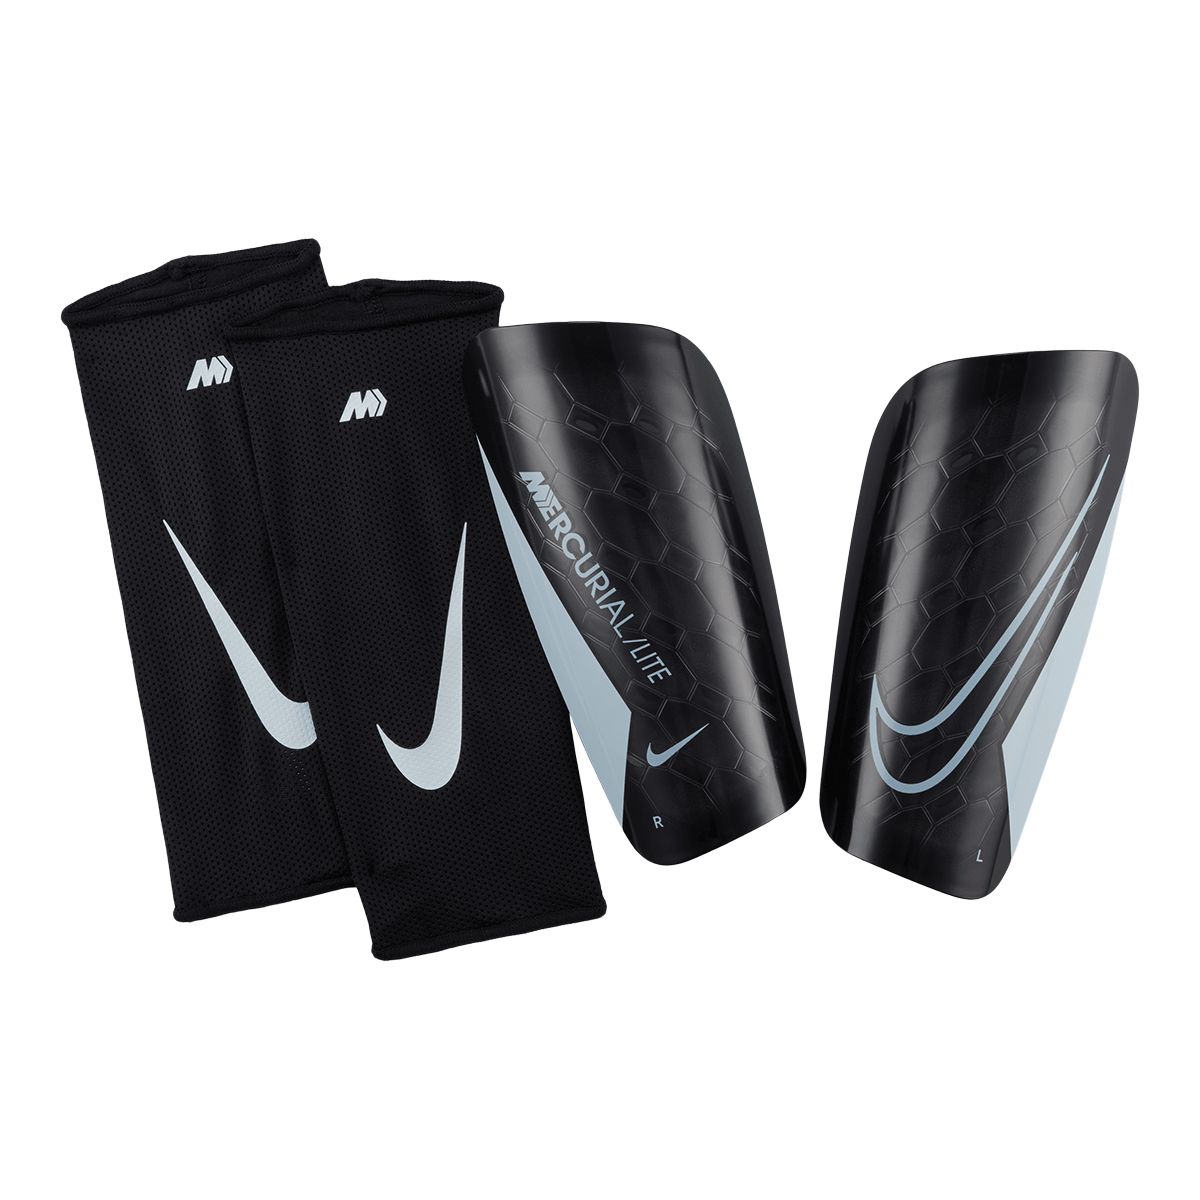  Under Armour UA Shin Guard Sleeves Black S : Sports & Outdoors